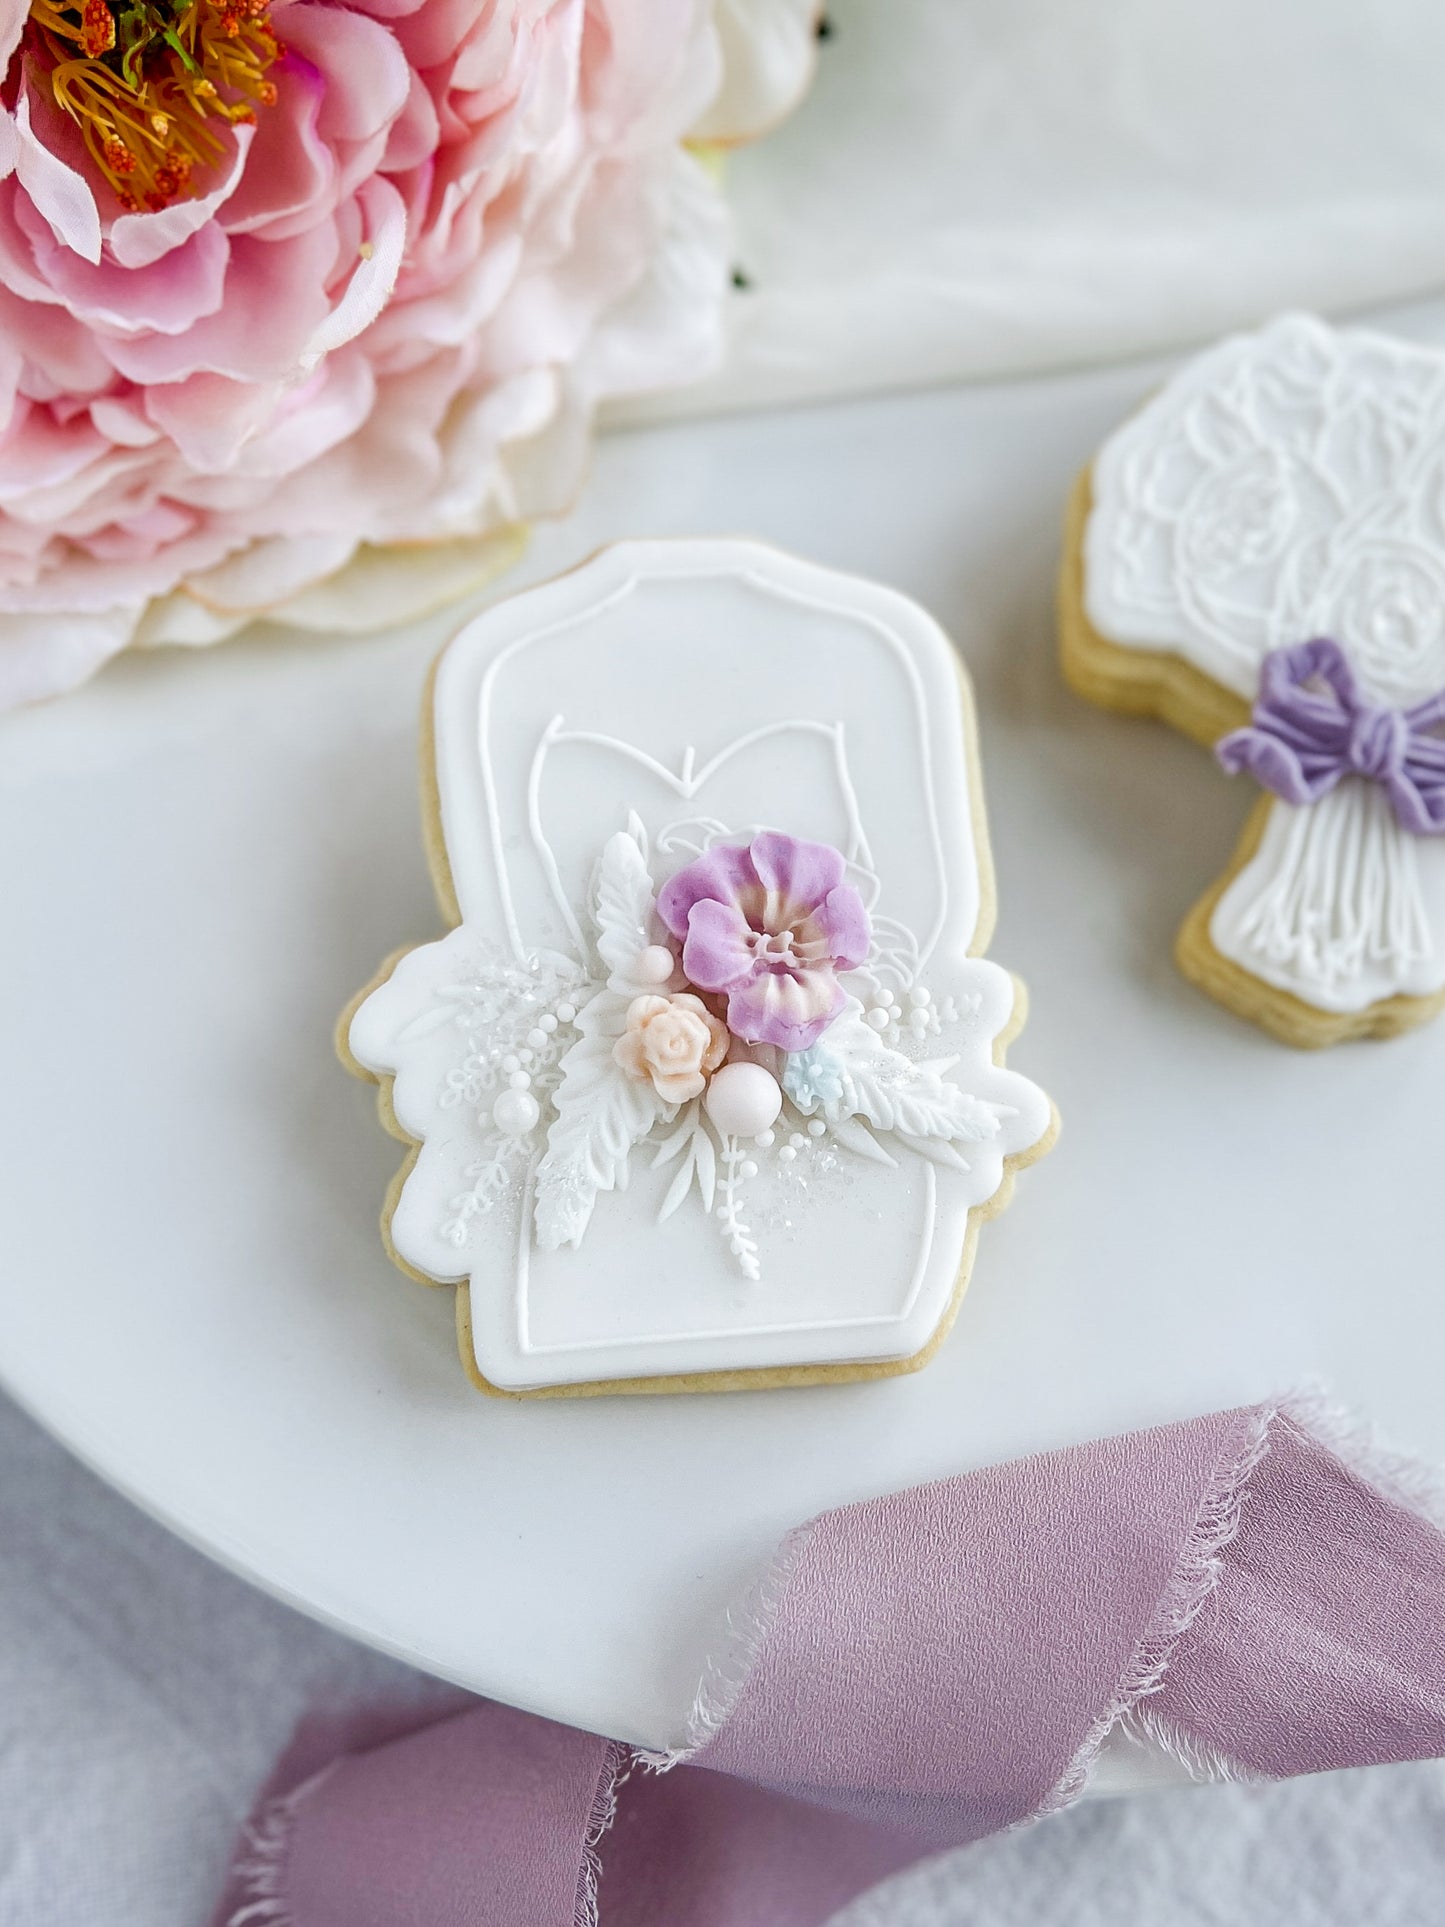 Bride holds her Bouquet + Cookie Cutter